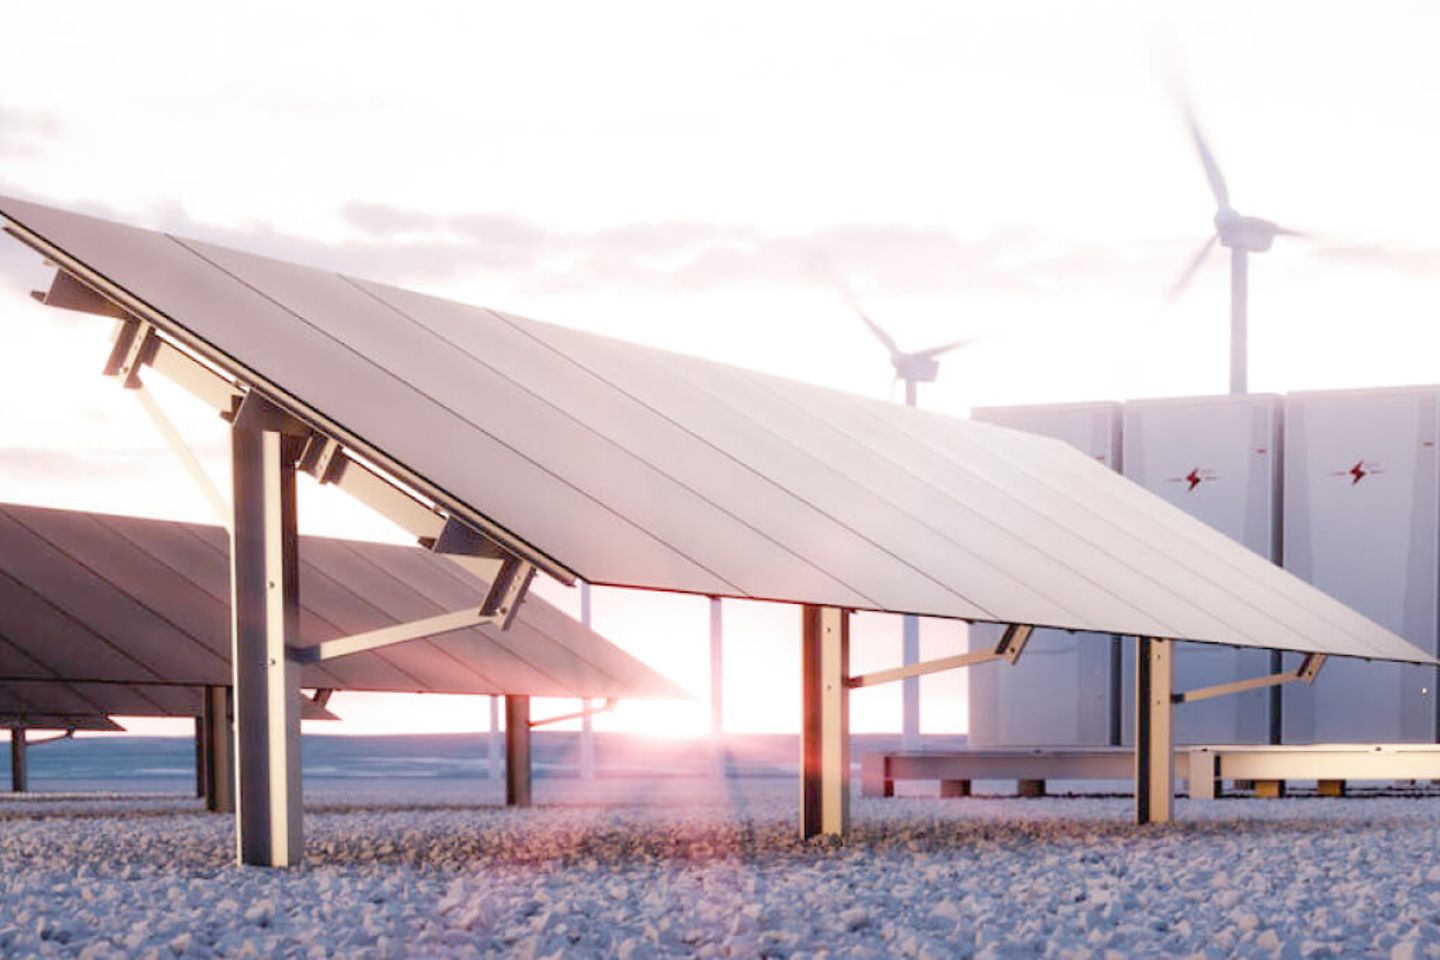 olar panels, a modular battery energy storage system and a wind turbine system